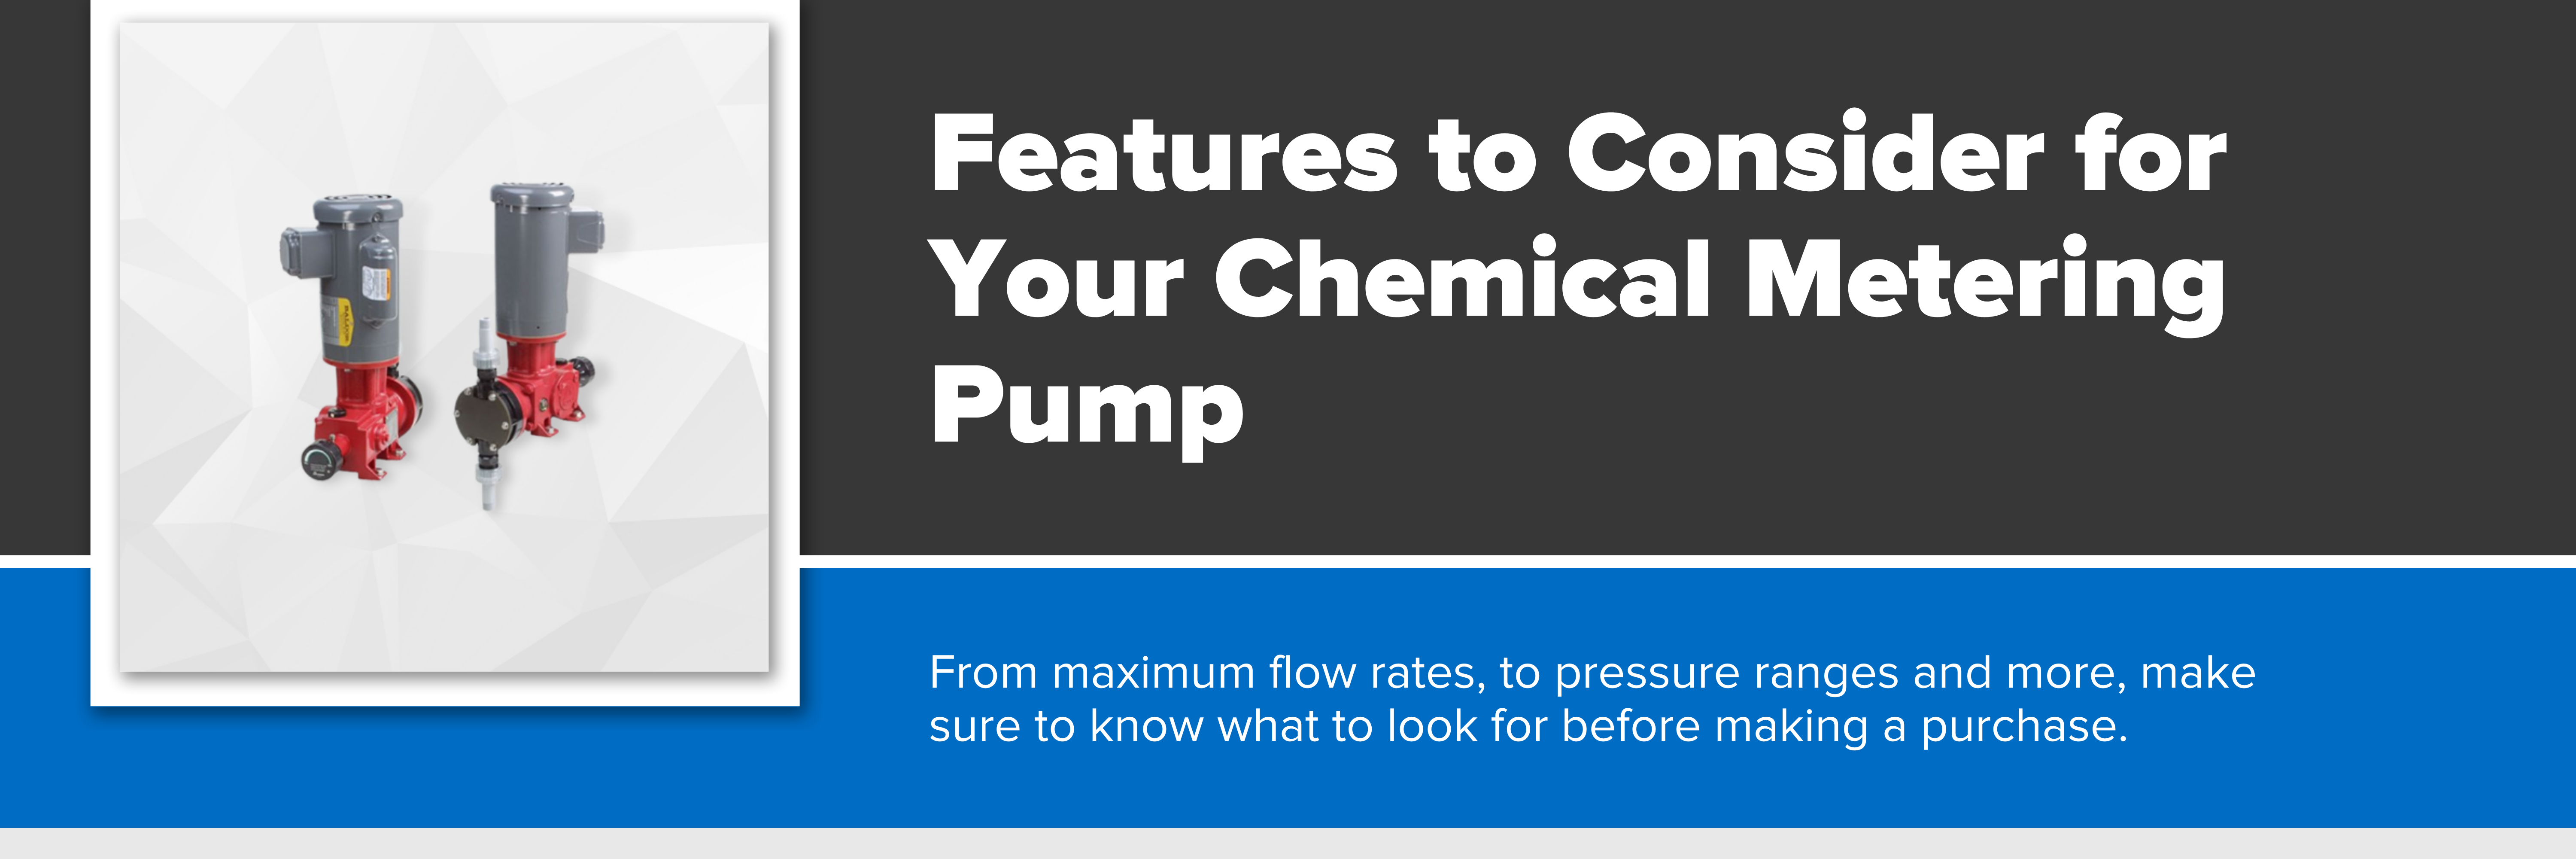 Header image with text "Features to consider for your chemical metering pump."